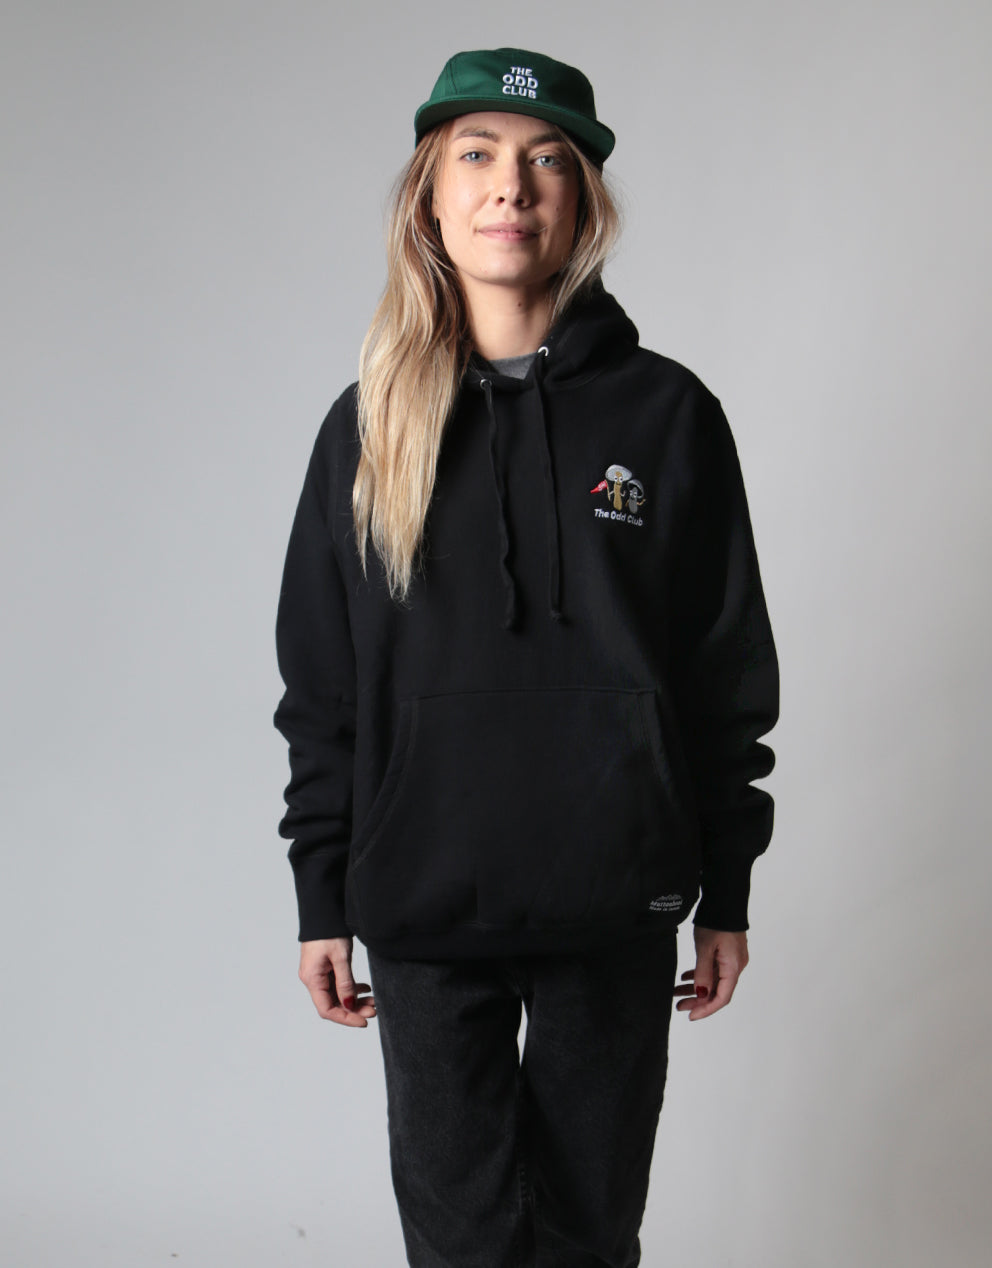 Pullover Cabin Hoodie - Black - The Odd Club - Second Harvest Series